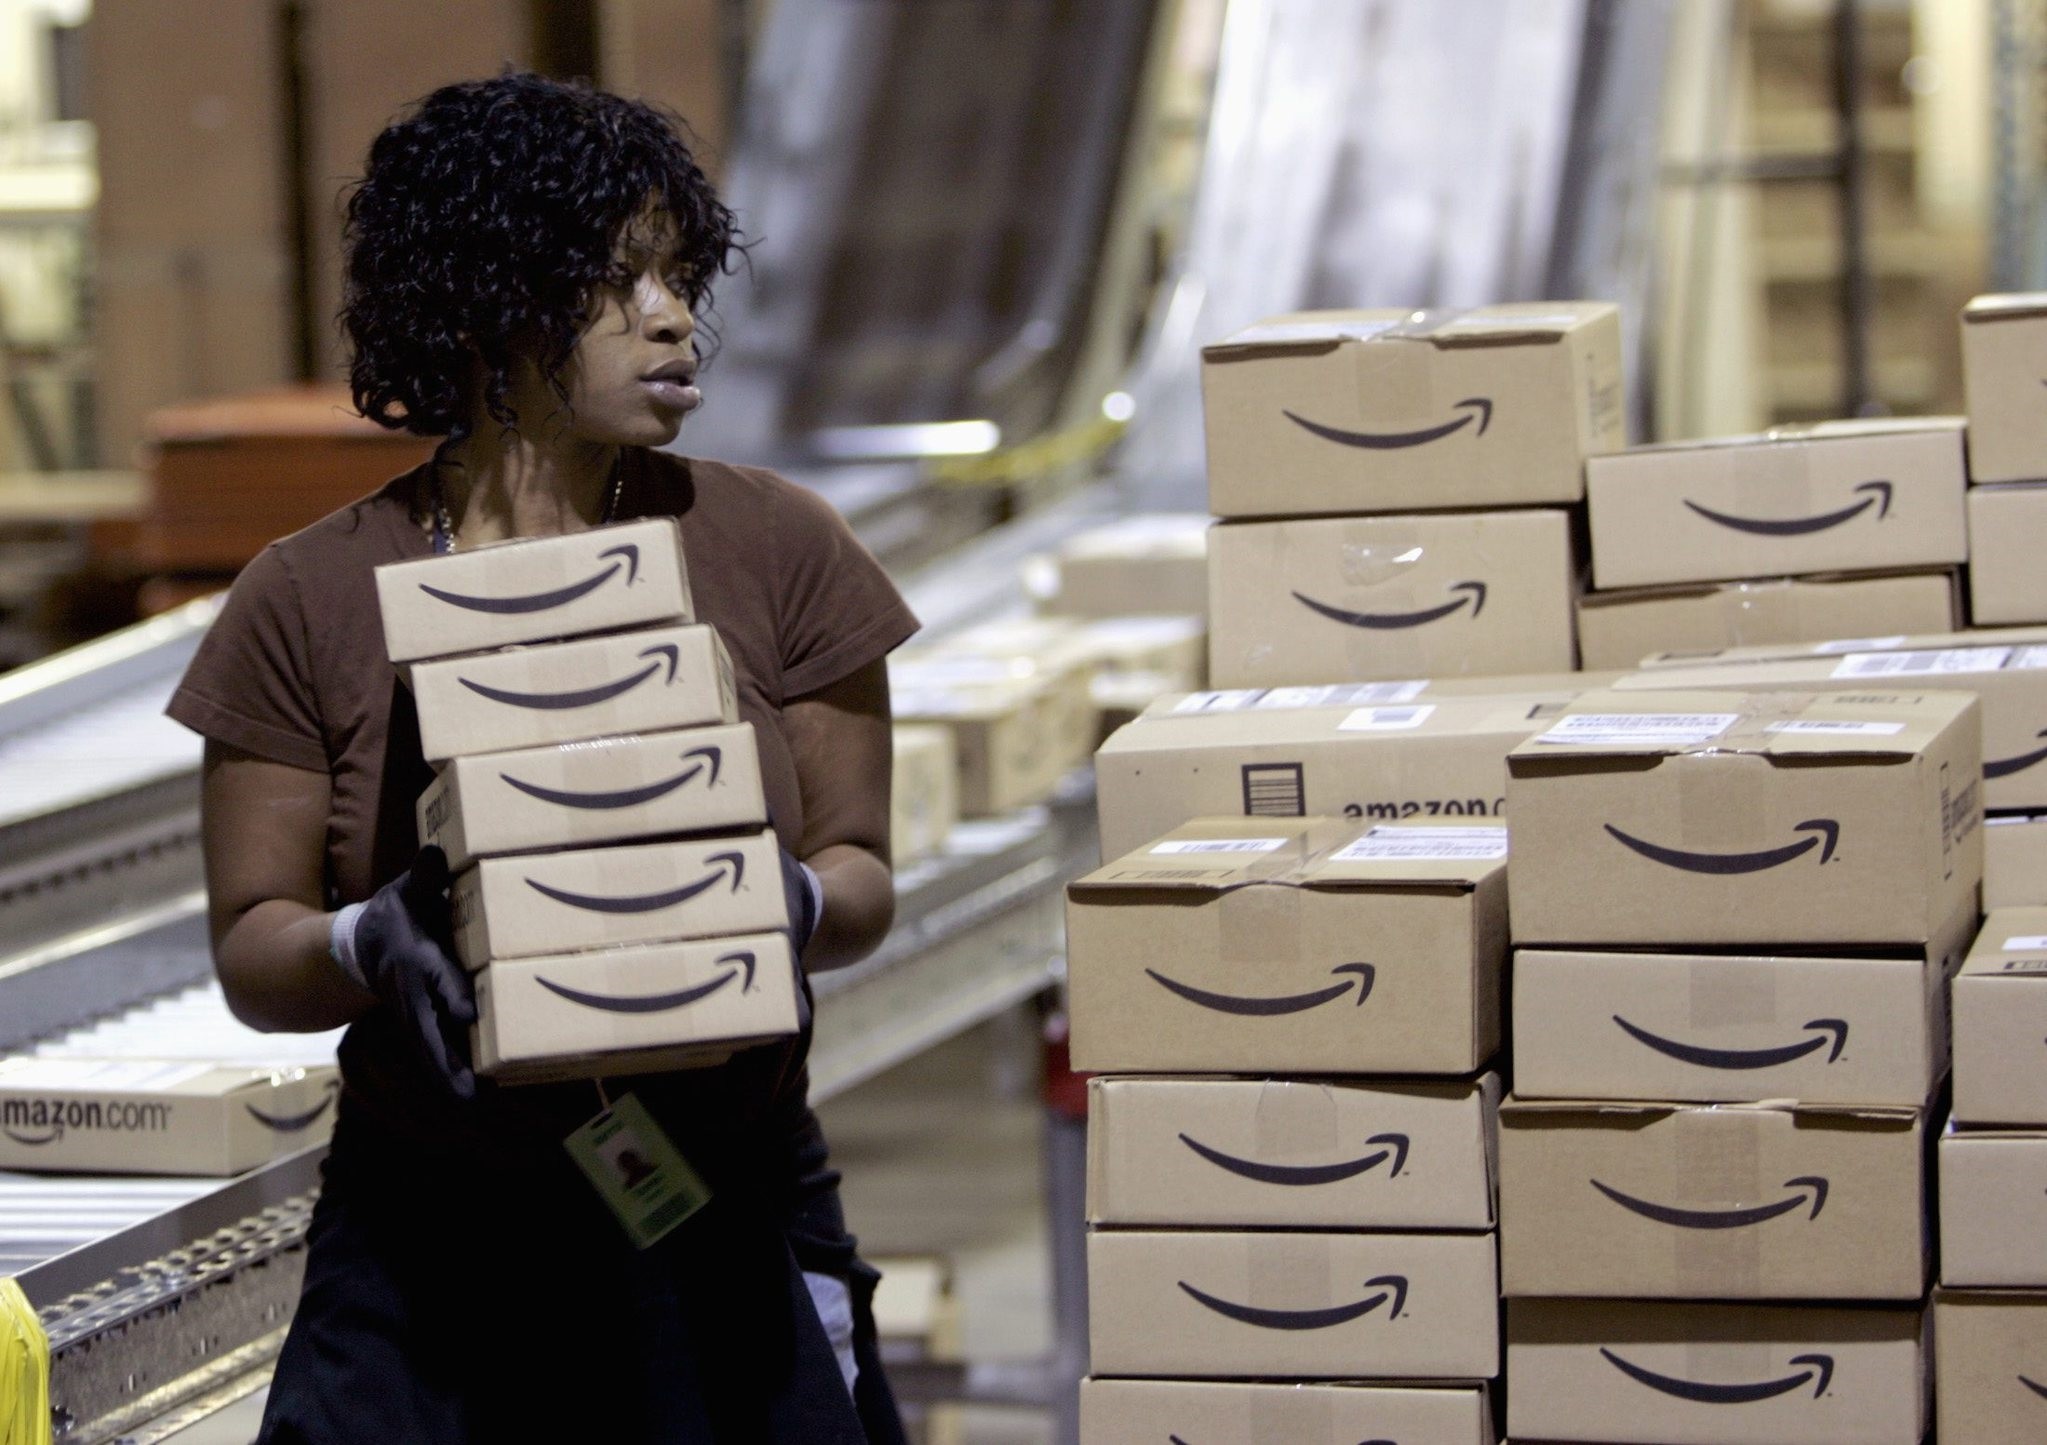 The report said Amazon will come to dominate online retail.